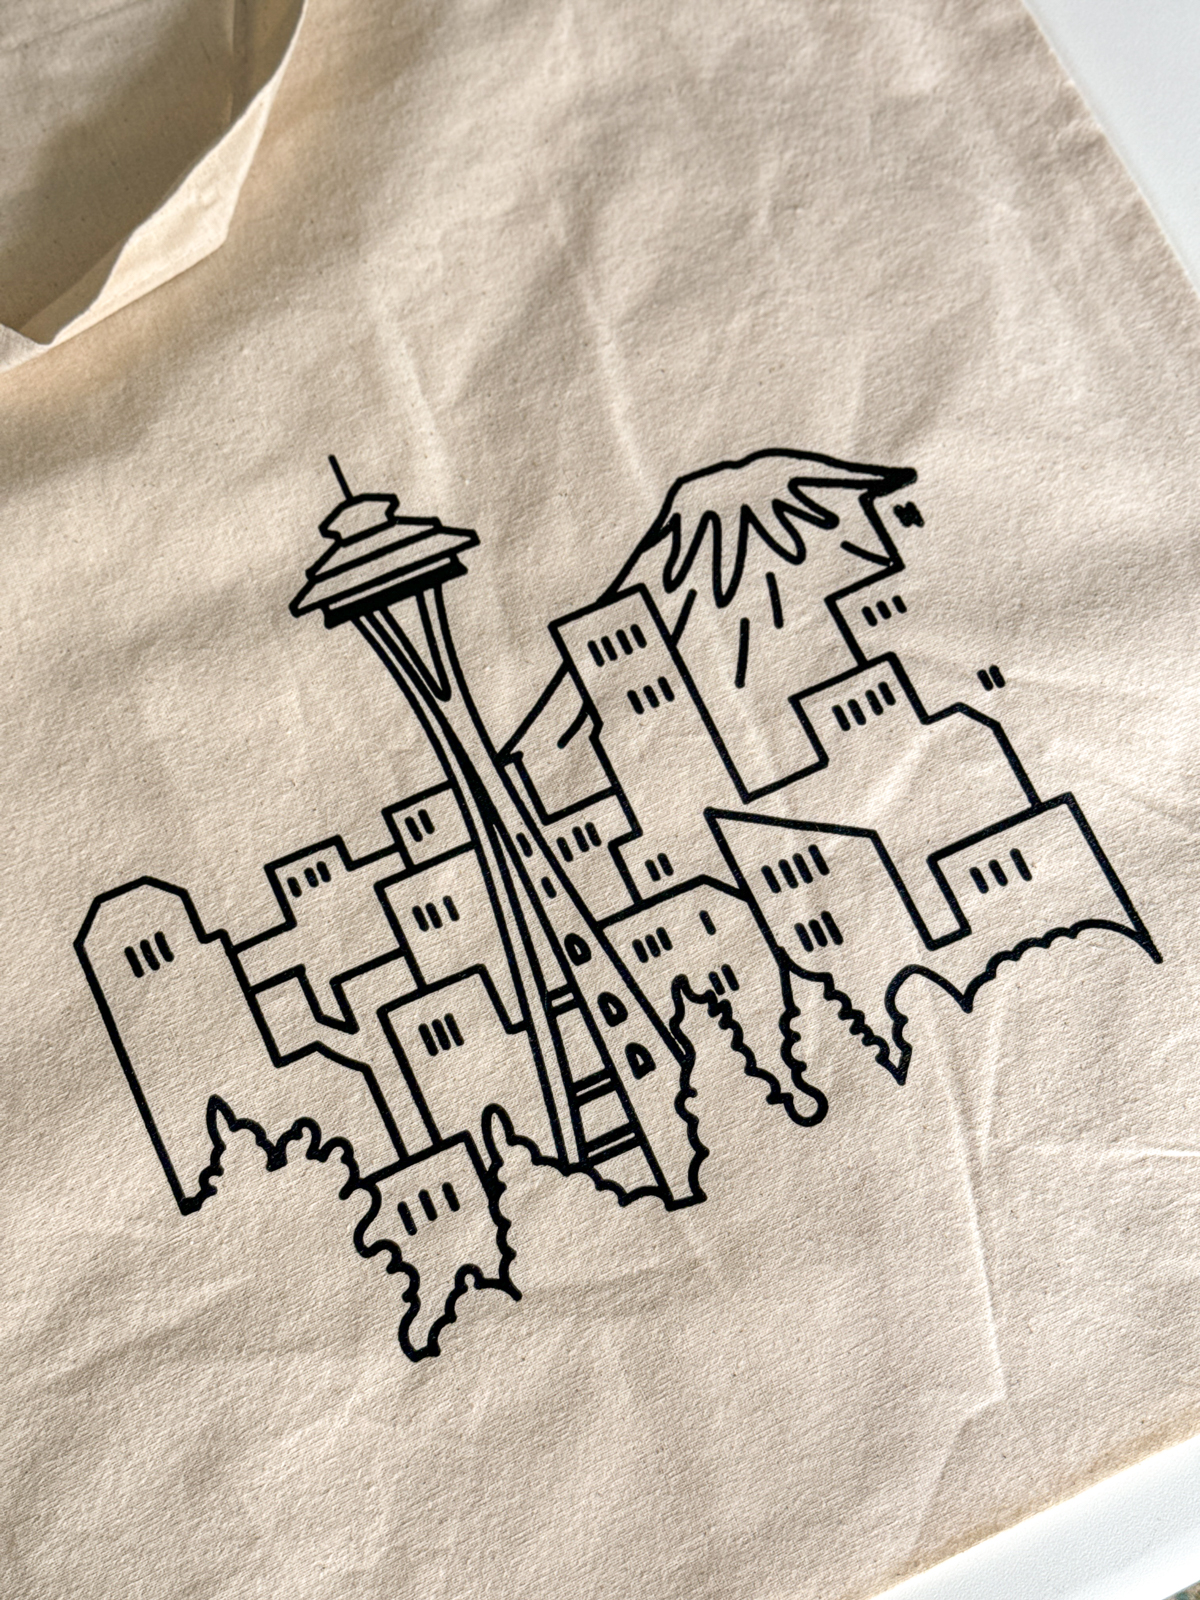 DIY screen printed tote bag with line drawing of the Space Needle and Mt. Rainier